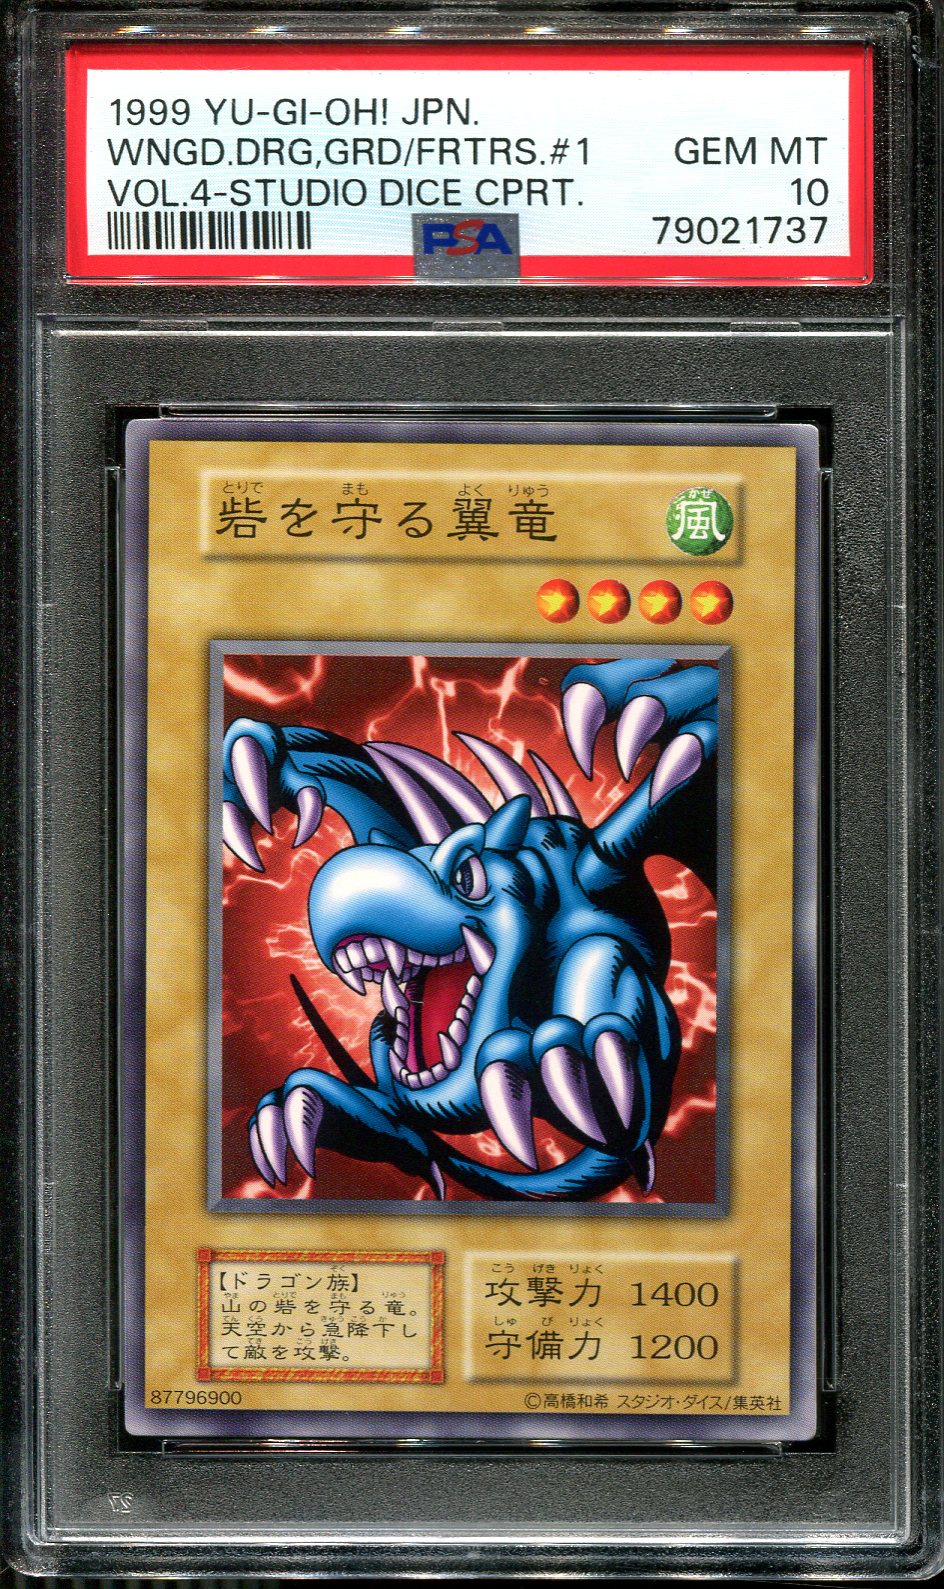 YUGIOH - PSA 10 - WINGED DRAGON GUARDIAN OF THE FORTRESS - VOLUME 4 - JAPANESE OCG